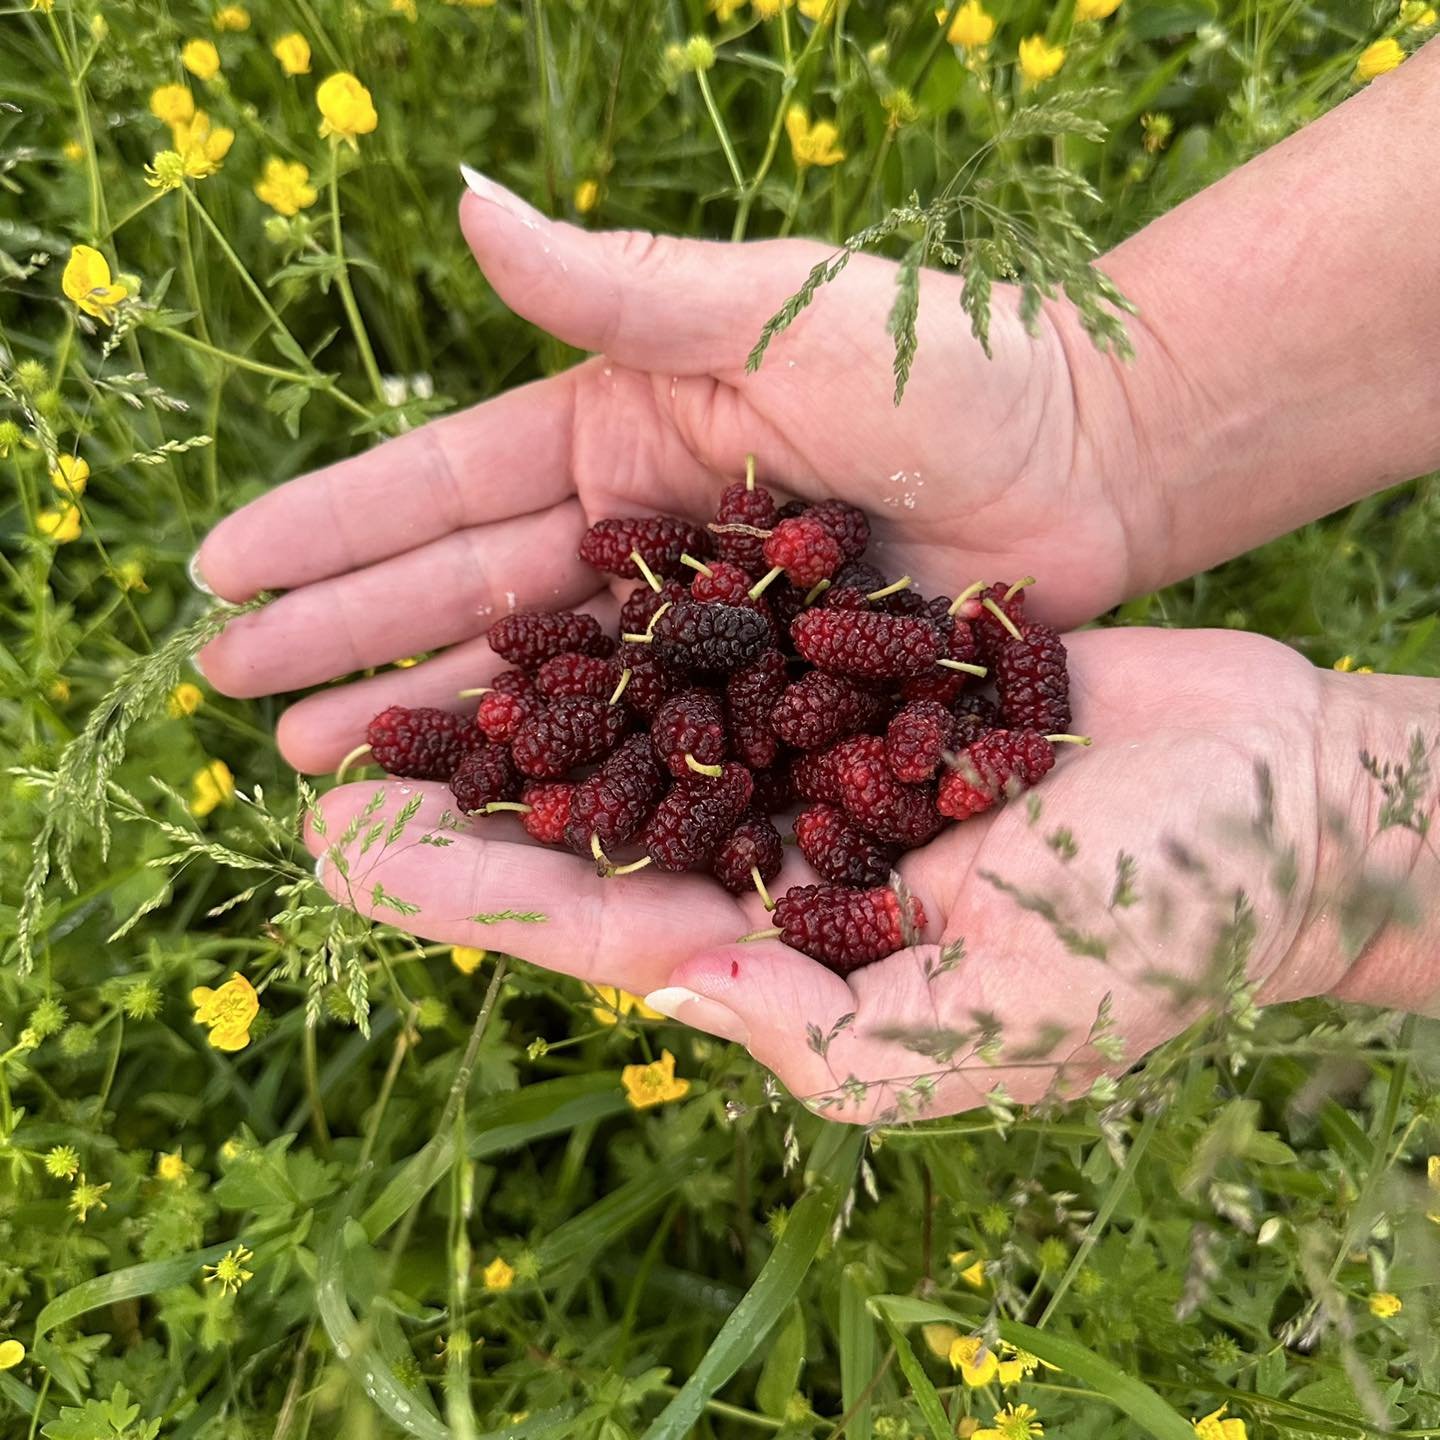 It&rsquo;s Mulberry season! Our estimate is that our largest mulberry tree on the farm is 50+ years or older! Boy this fruit sure is beautiful and delicious. 🤤 #fruittrees #farmlife #mulberry